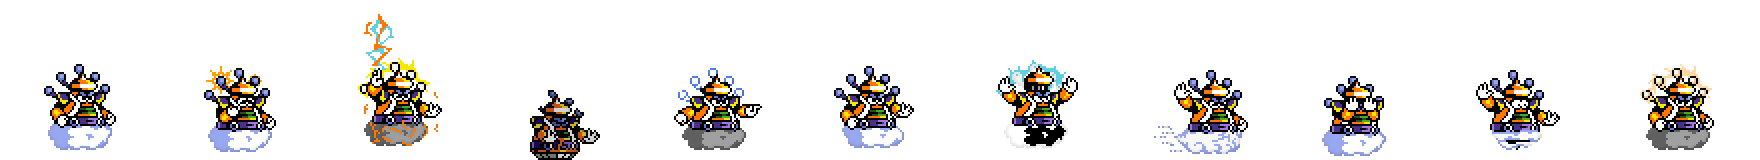 Cloud Man | Base Sprite Right<div style="margin-top: 4px; letting-spacing: 1px; font-size: 90%; font-family: Courier New; color: rgb(159, 150, 172);">[robot:right:base]{cloud-man}</div>